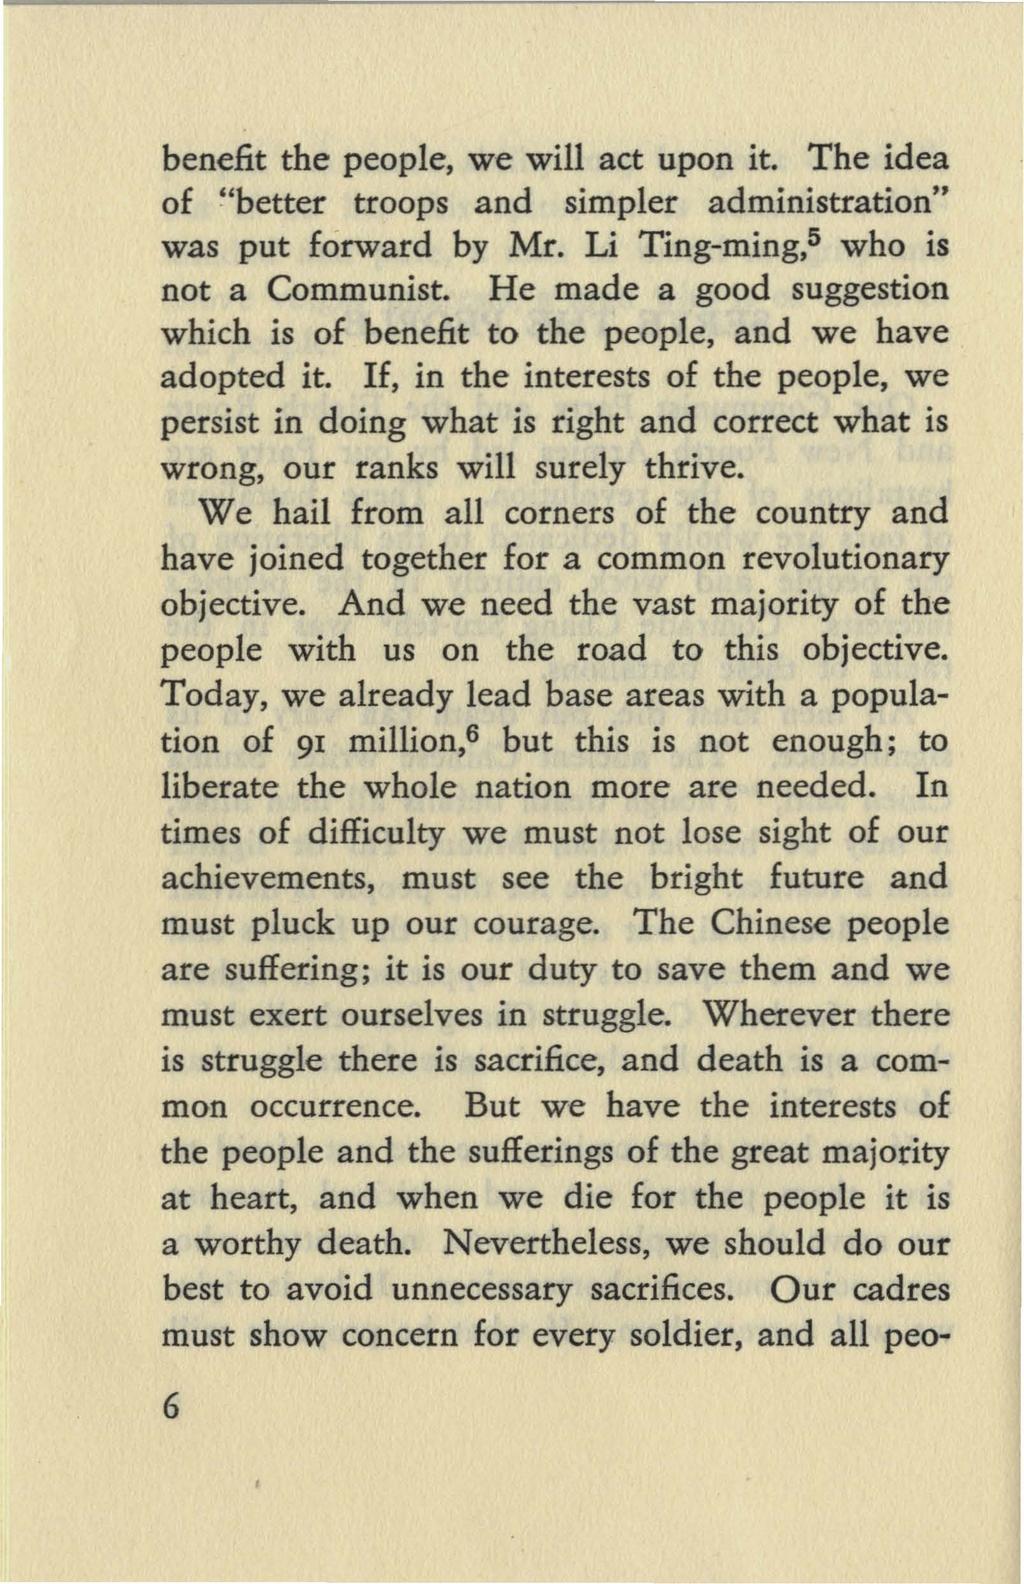 benefit the people, we will act upon it. The idea of "better troops and simpler administration" was put forward by Mr. Li Ting-ming.P who is not a Communist.